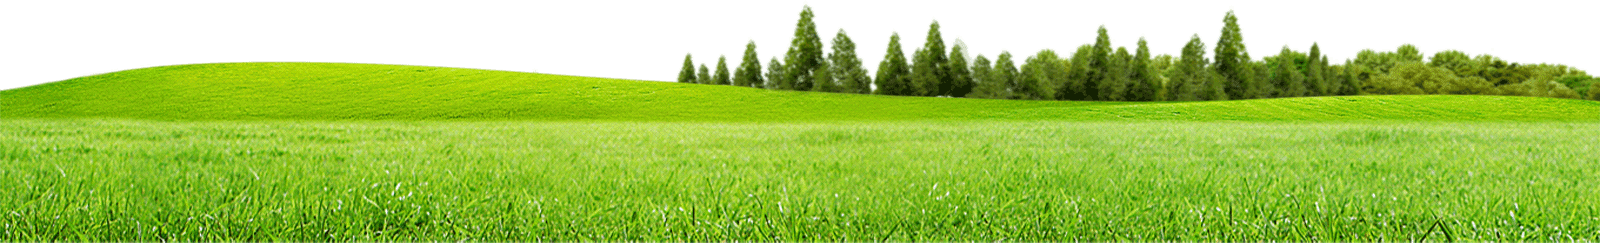 Field Meadow Photos HQ Image Free PNG Image